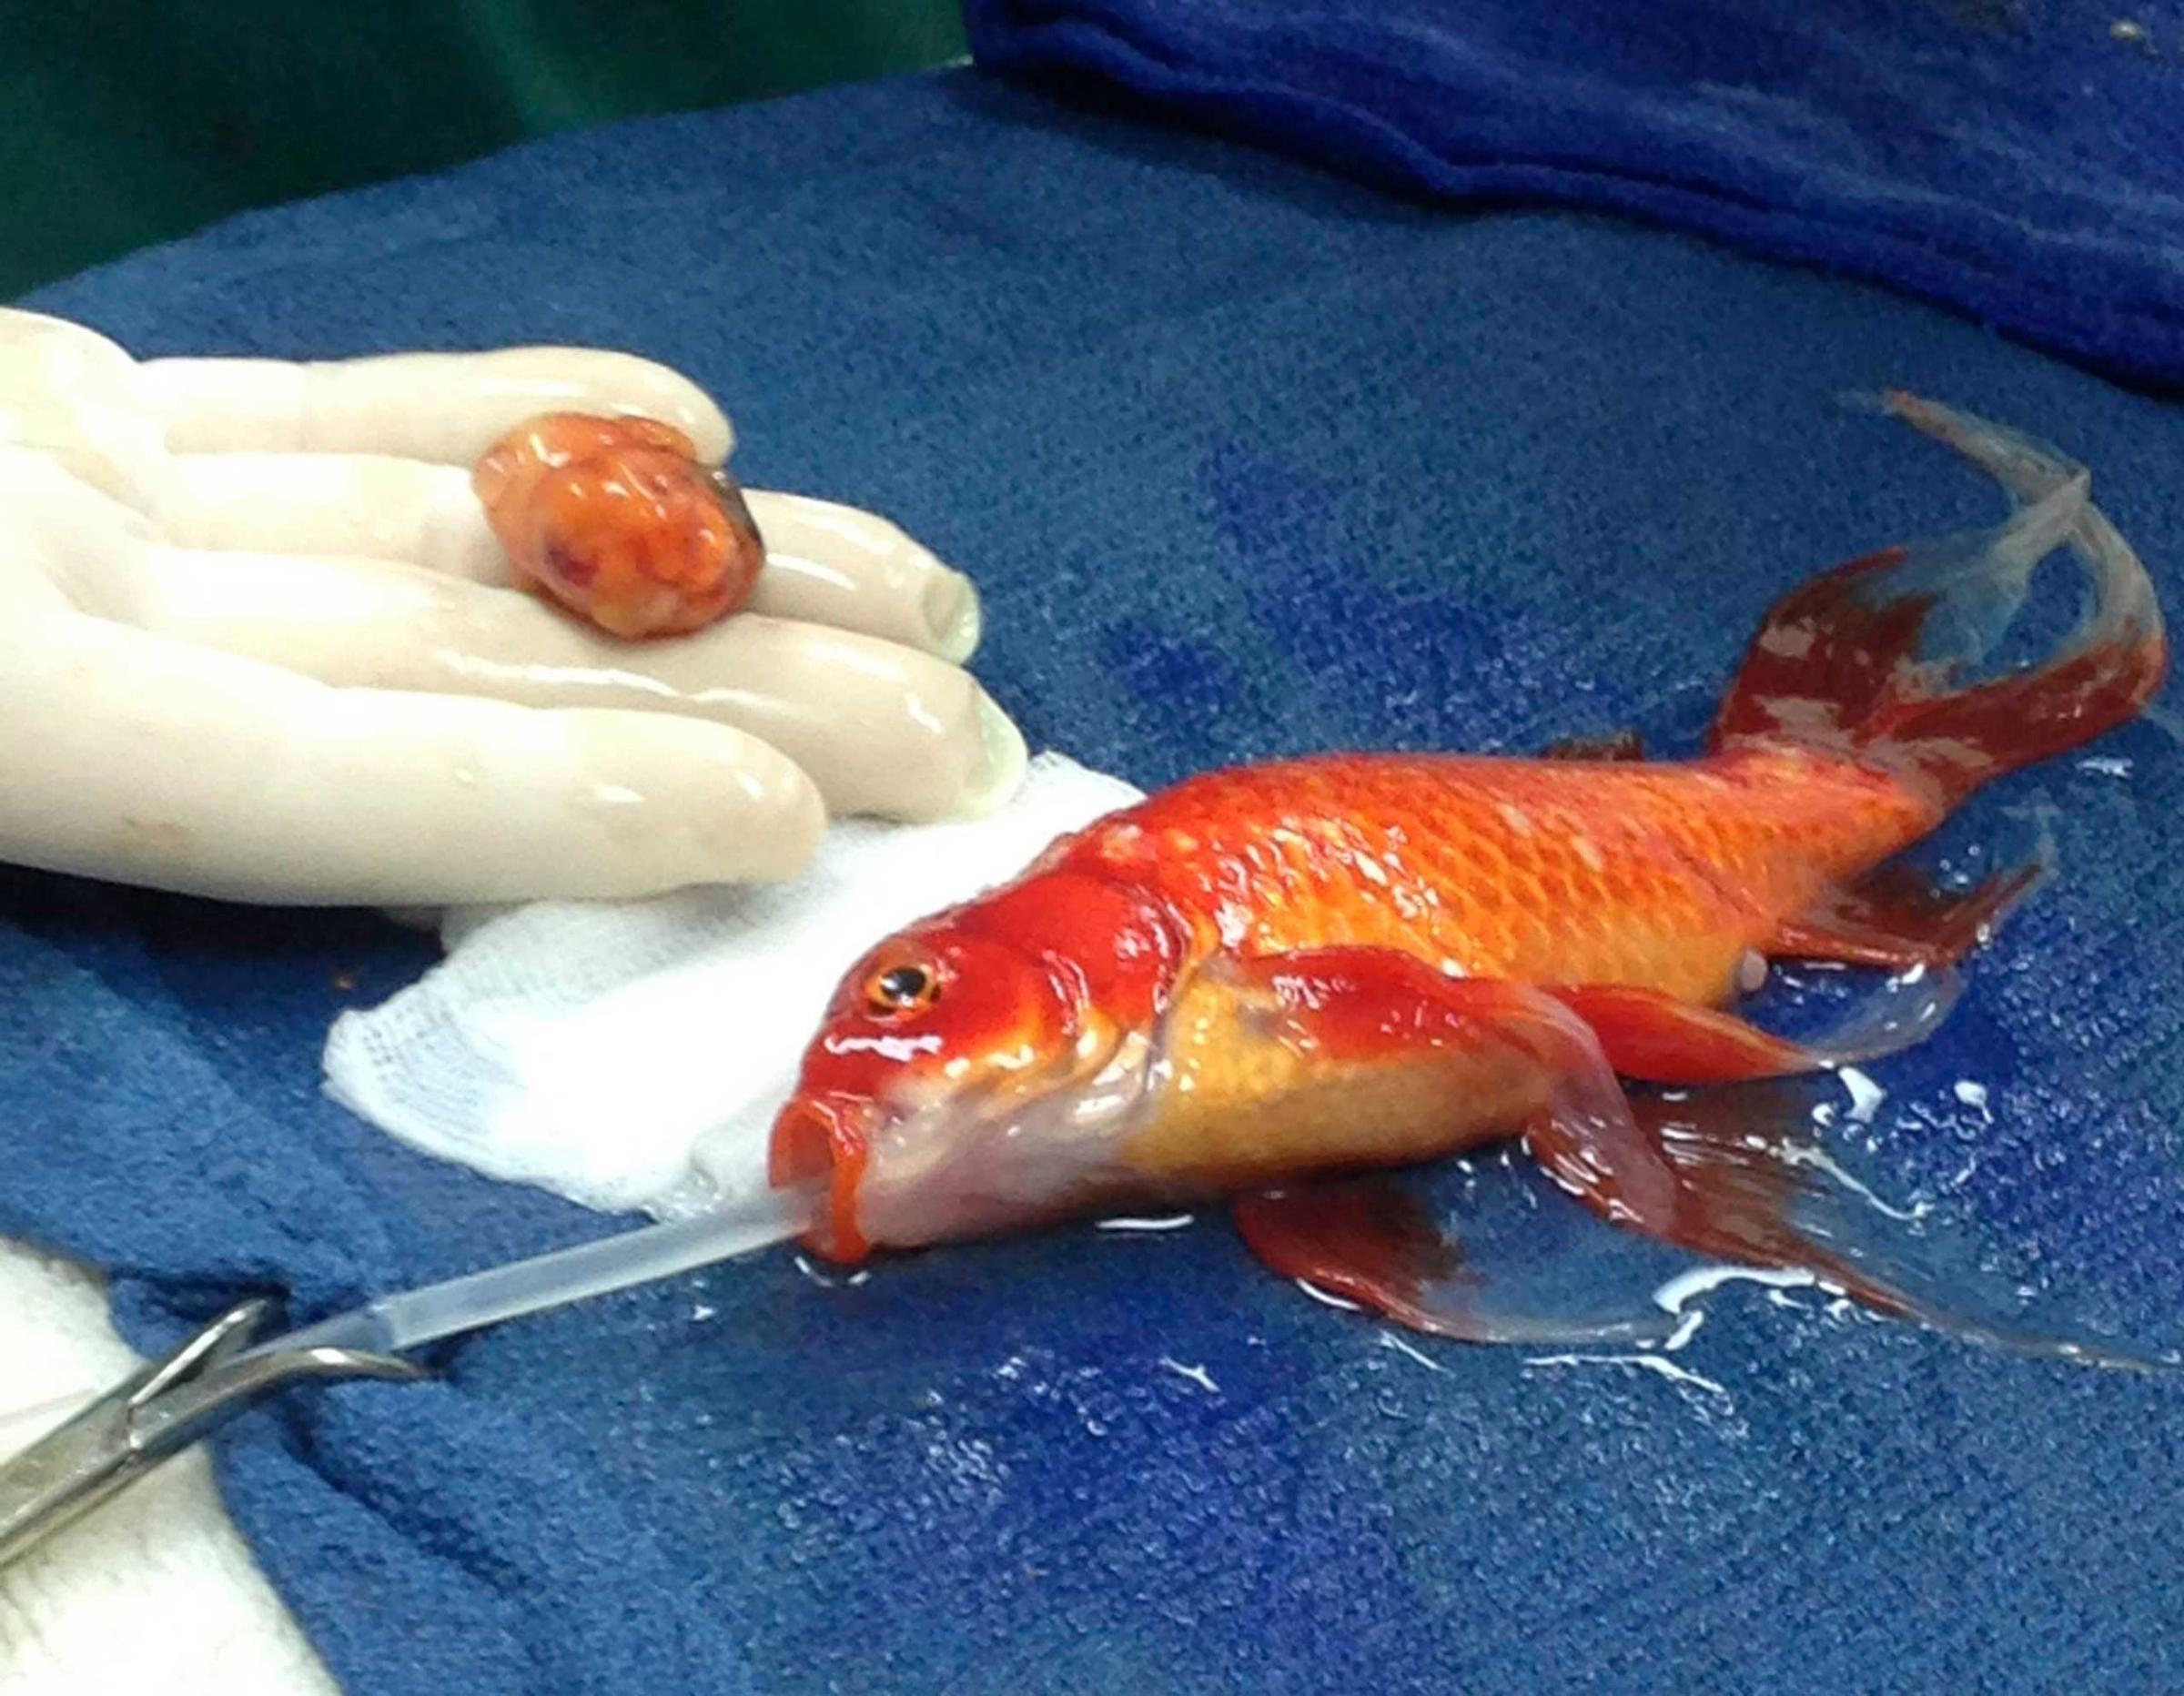 In this photo provided to Reuters by the Lort Smith Animal Hospital in Melbourne, a 10-year-old pet goldfish is prepared for the removal of a life-threatening head tumor, Sept. 11, 2014.